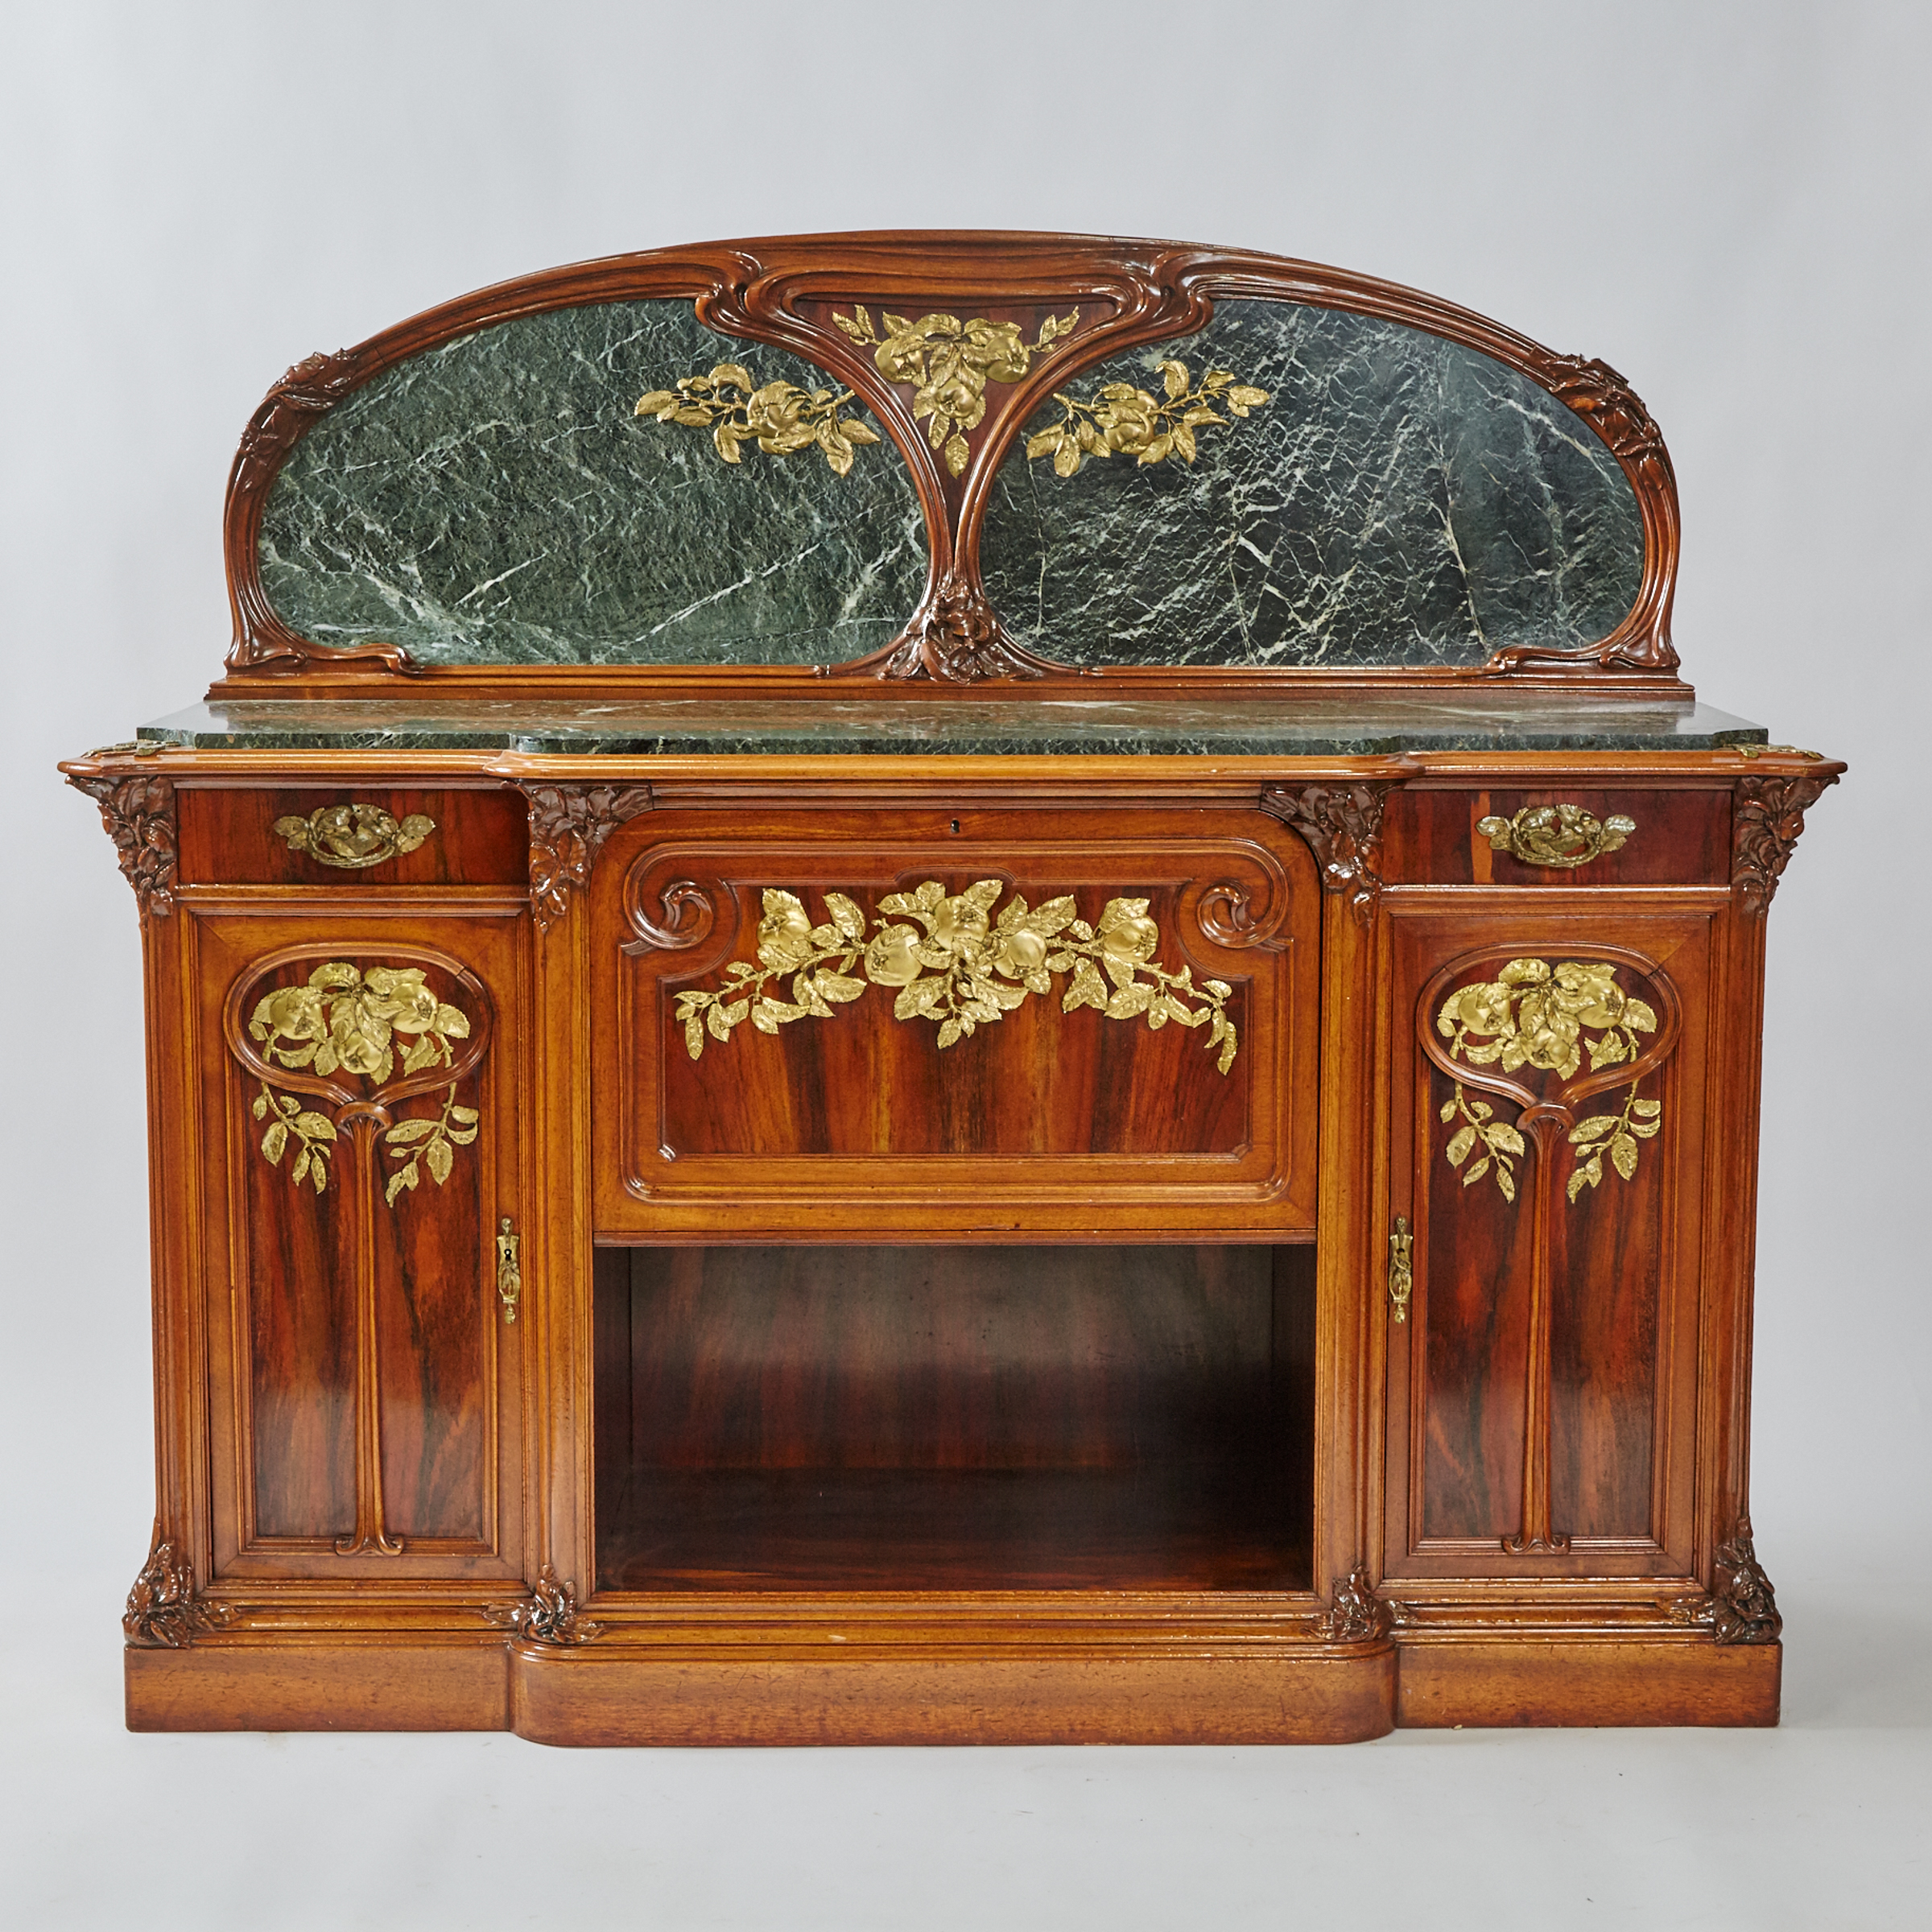 Louis Majorelle French Art Nouveau Ormolu Mounted Mahogany and Rosewood Sideboard, 19th/early 20th century